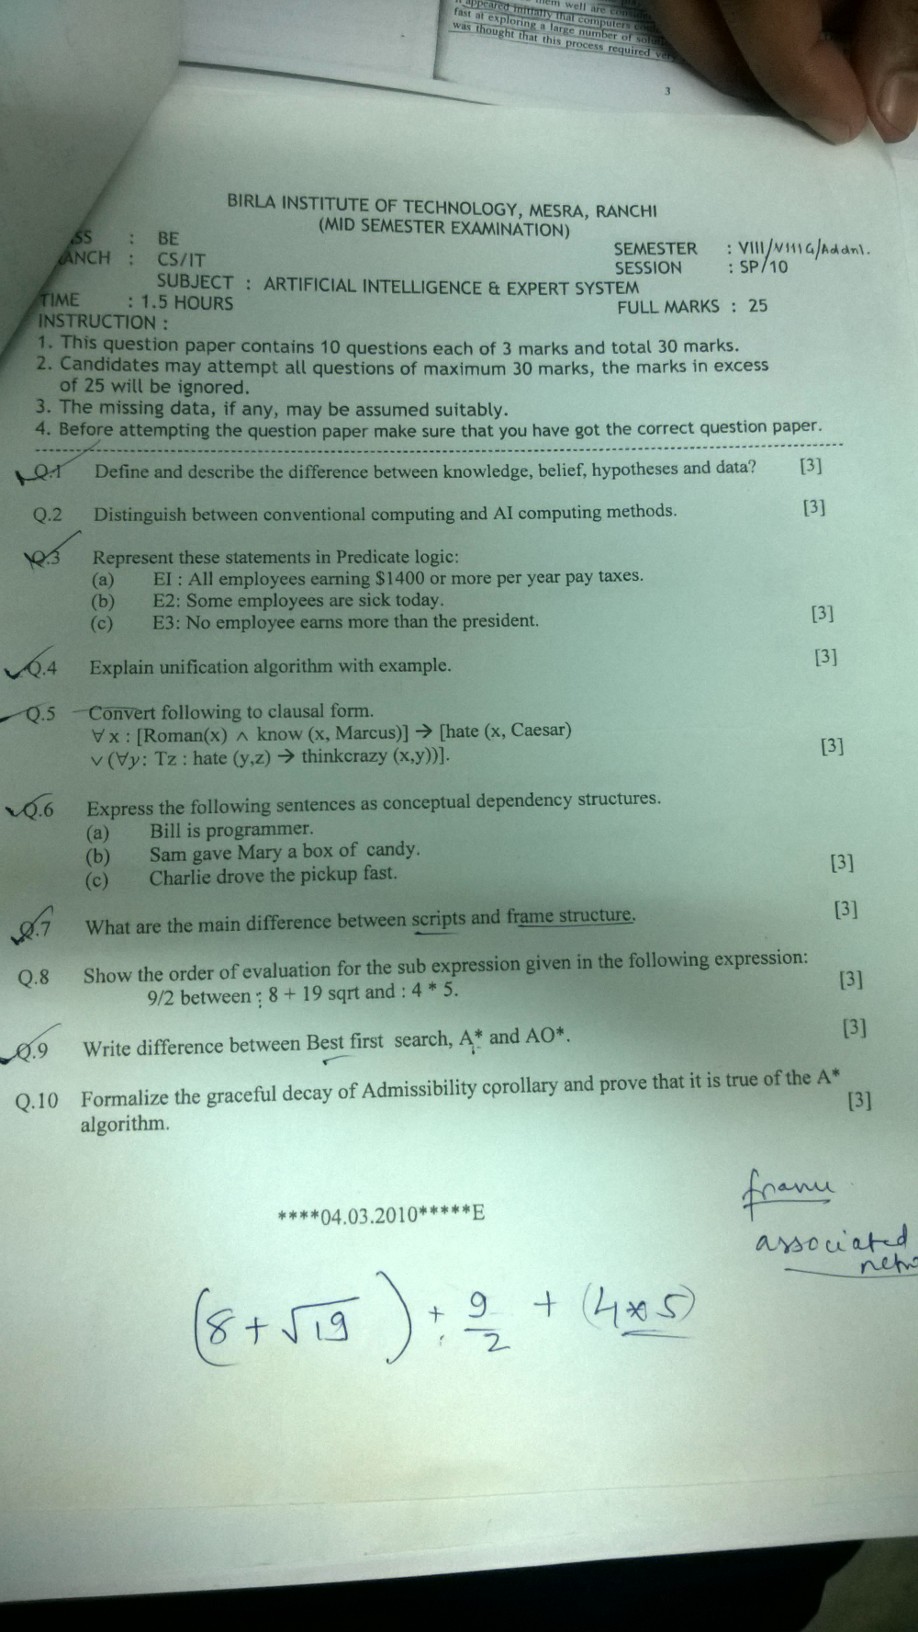 Artificial Intelligence and Expert System Question Paper-858_a i mid sem.jpg